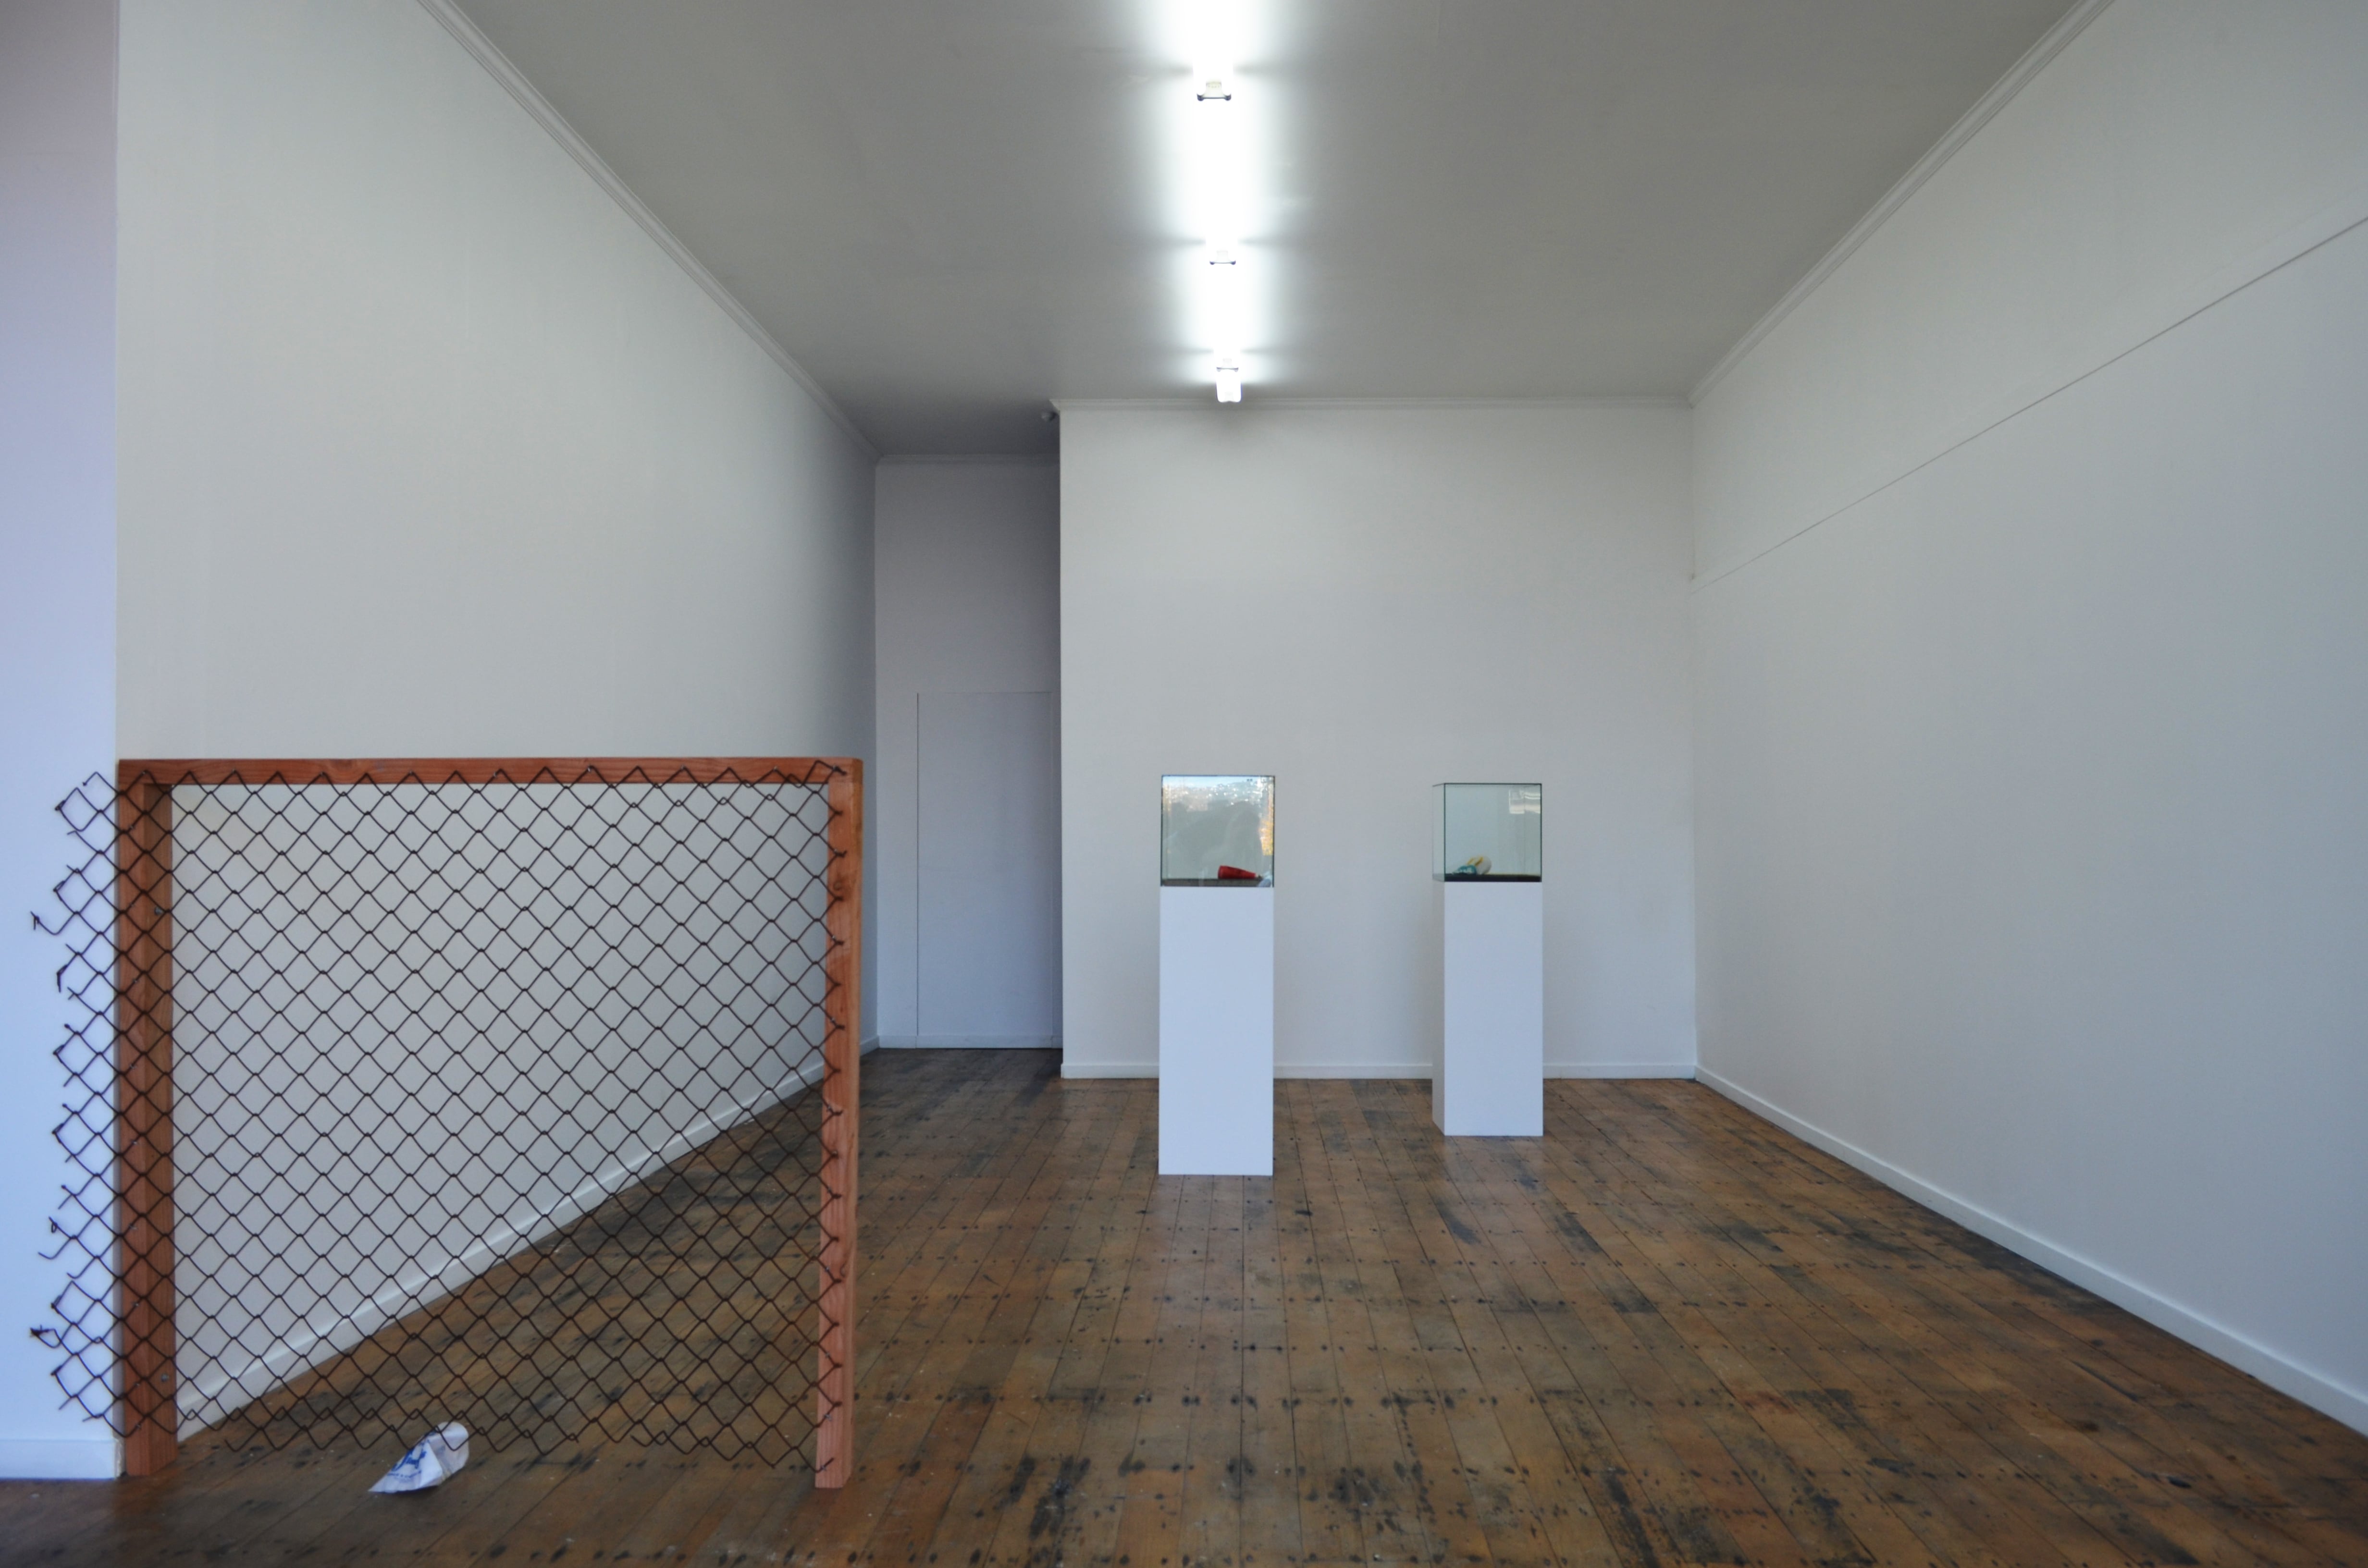 Image 03: Jay Hutchinson, 'two drinks and a Jimmy’s mince and cheese pie wrapper', 2018, installation view. Courtesy Blue Oyster Art Project Space.